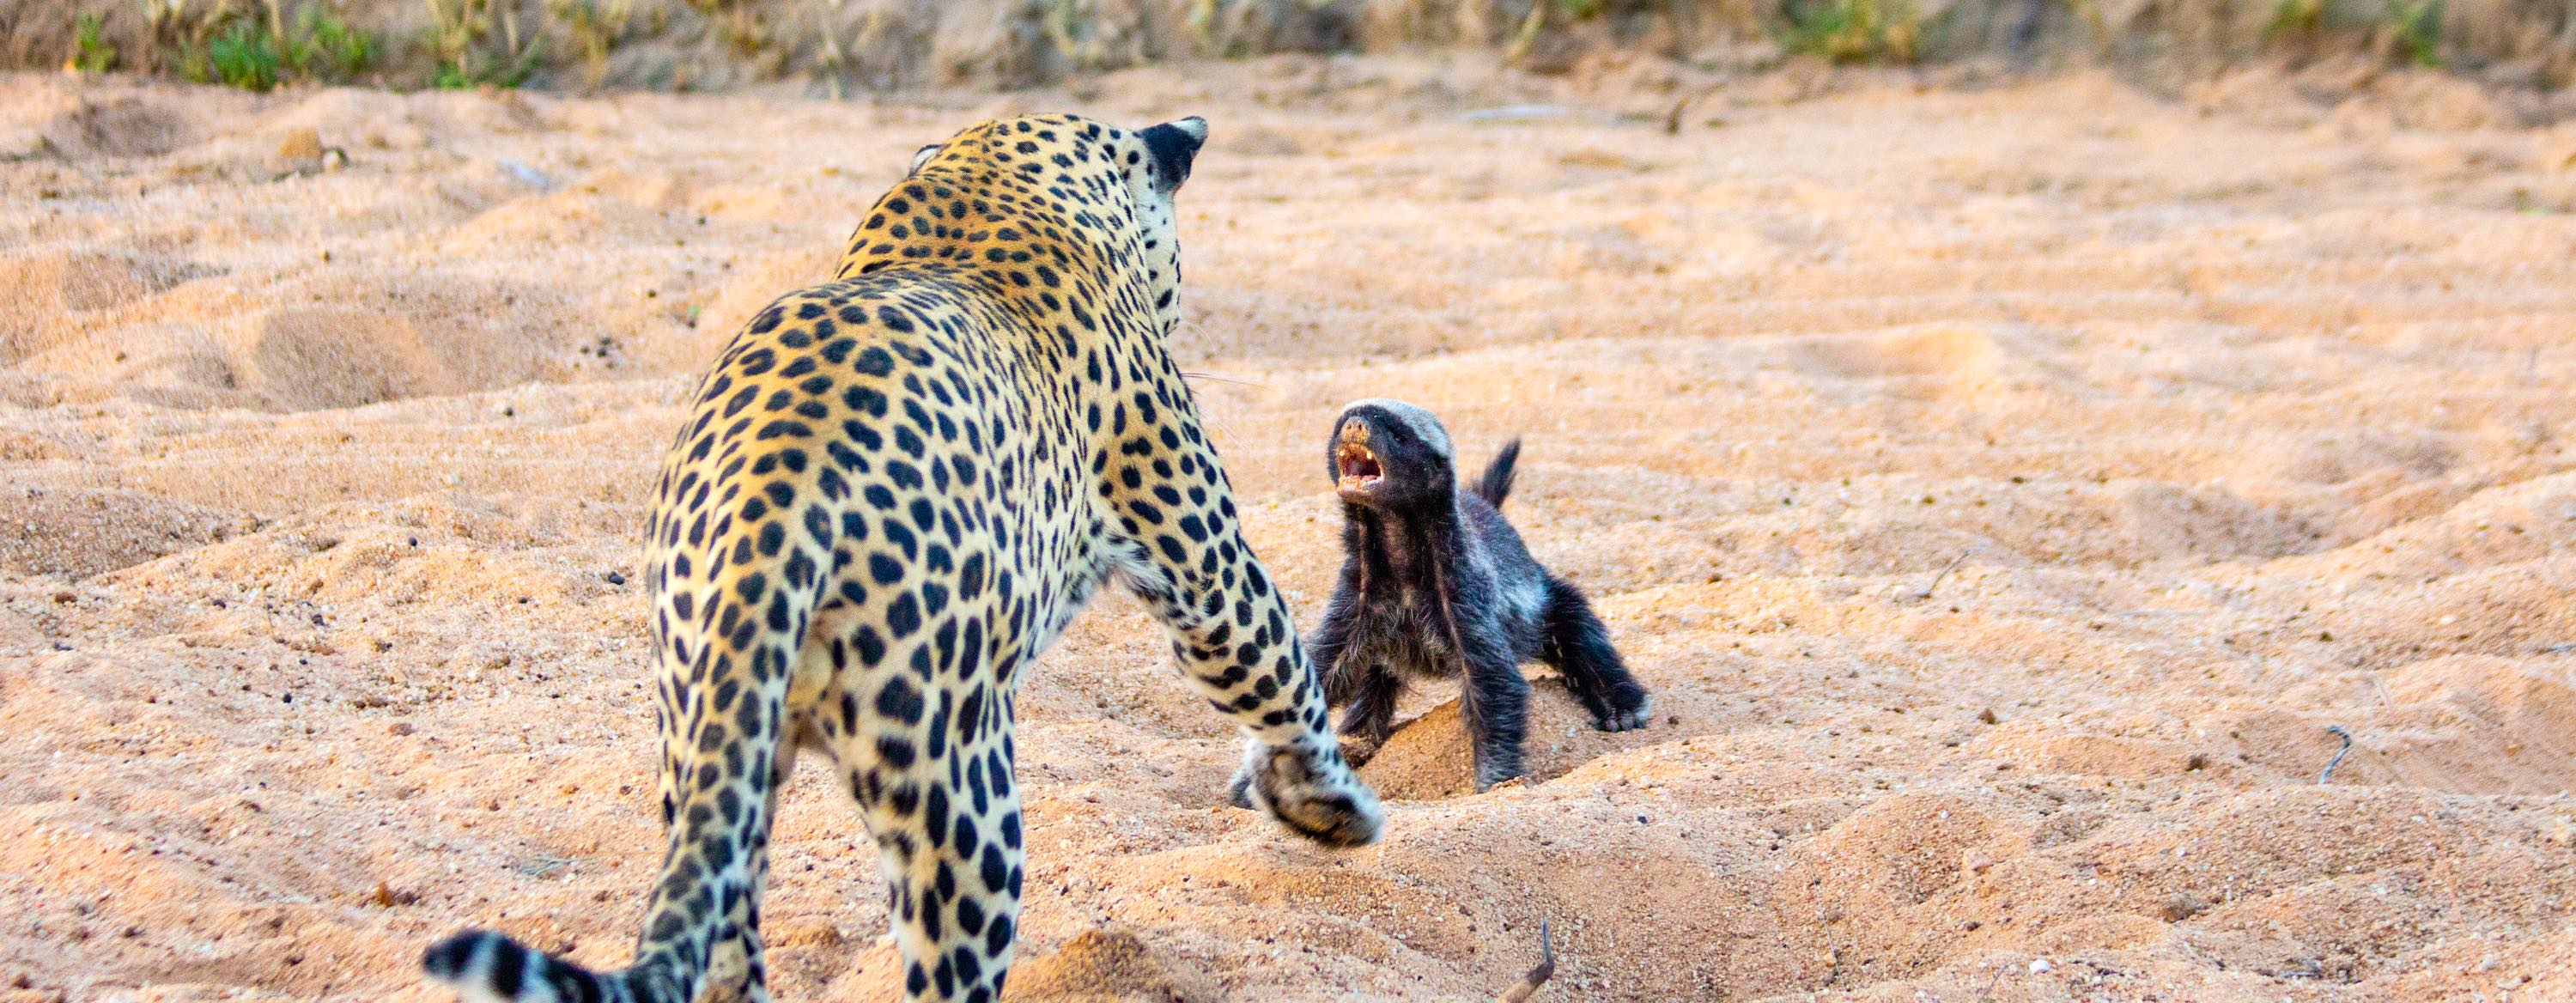 A leopard faces off against an angry-looking honey badger.